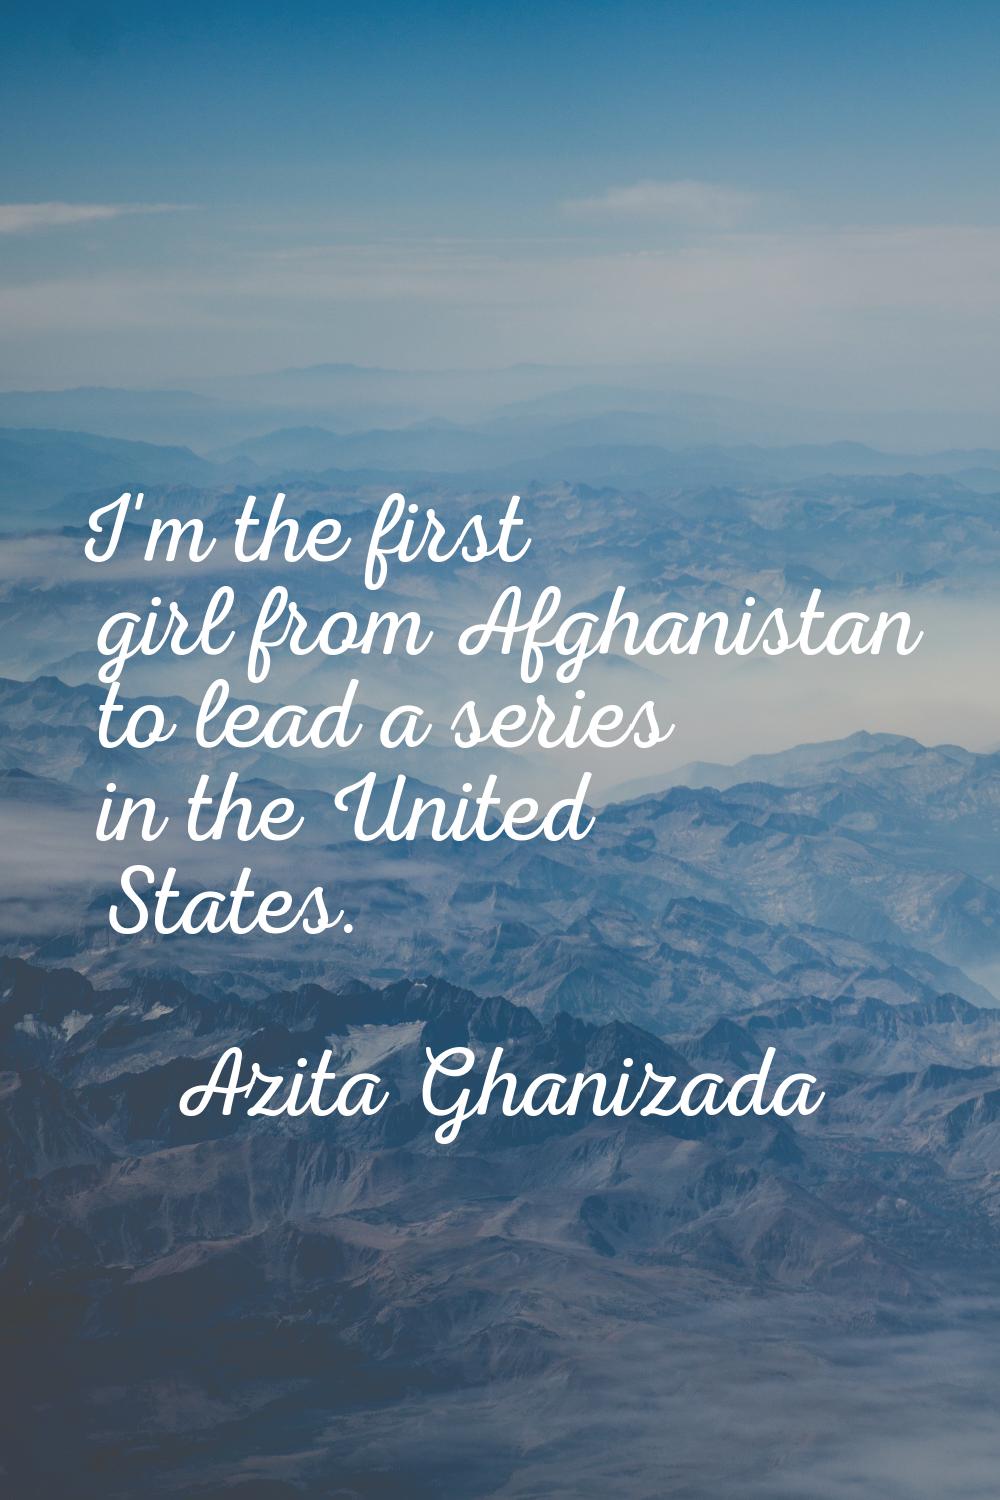 I'm the first girl from Afghanistan to lead a series in the United States.